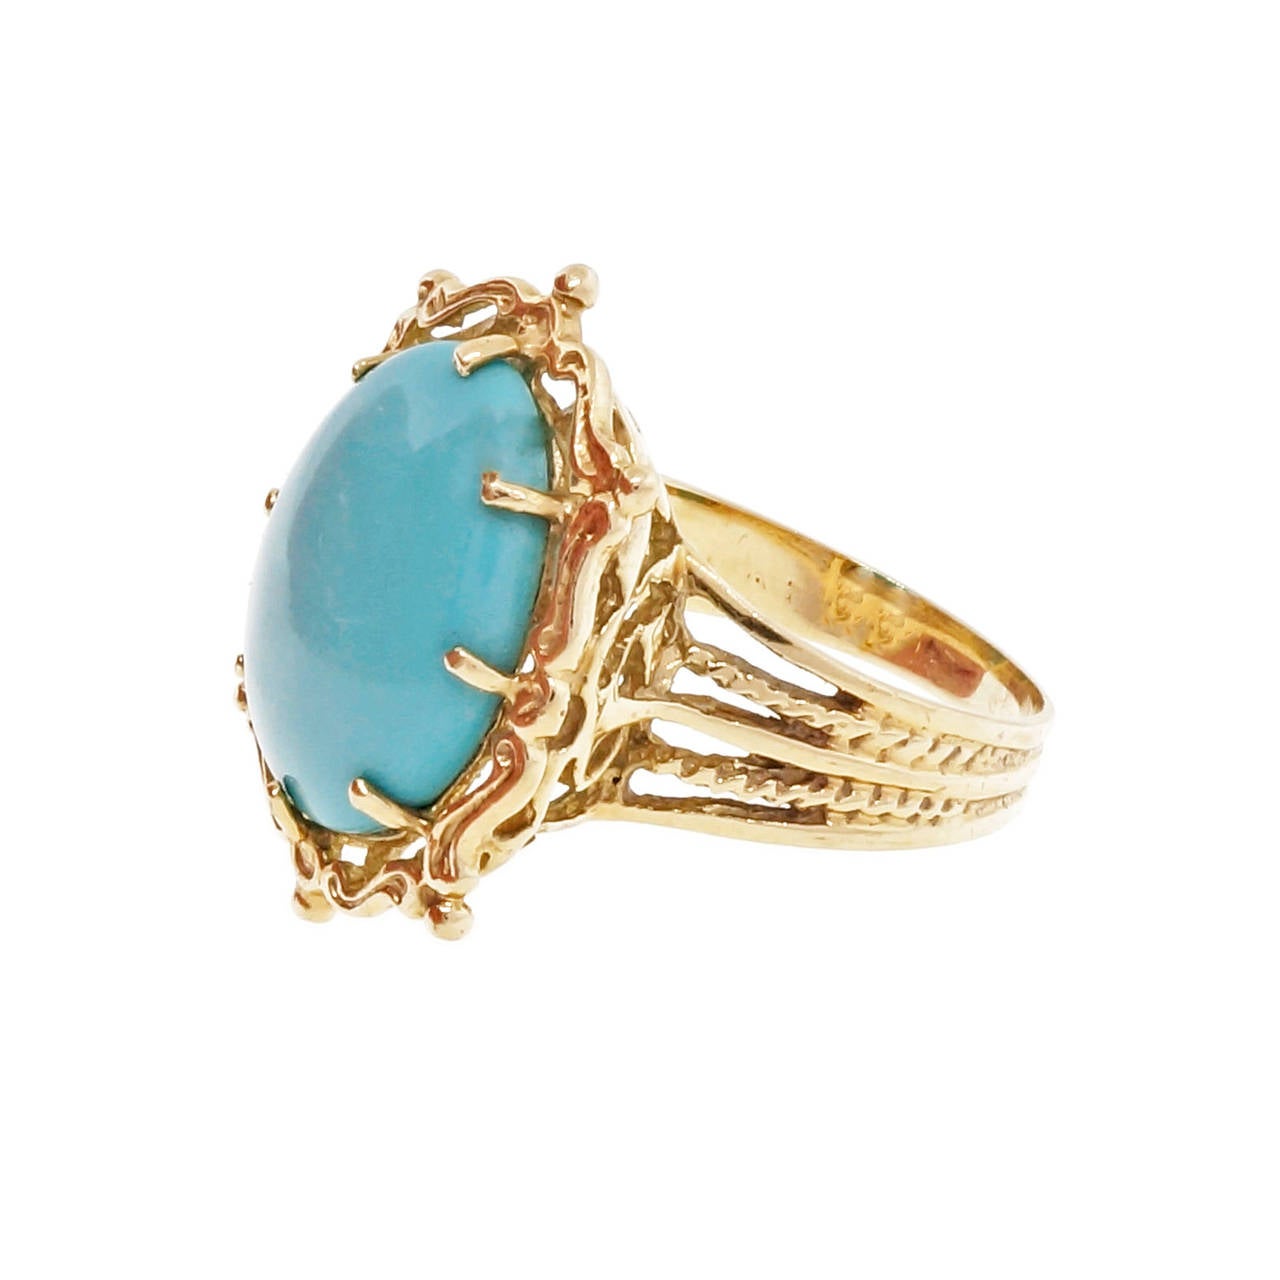 Large oval Turquoise 14k yellow gold open work cocktail ring. Circa 1970s with natural untreated bright blue Turquoise. 

1 oval cabochon Robins Egg blue natural untreated Turquoise, 15.79 x 11.57mm
Size 7.75 and sizable
14k yellow gold
5.6